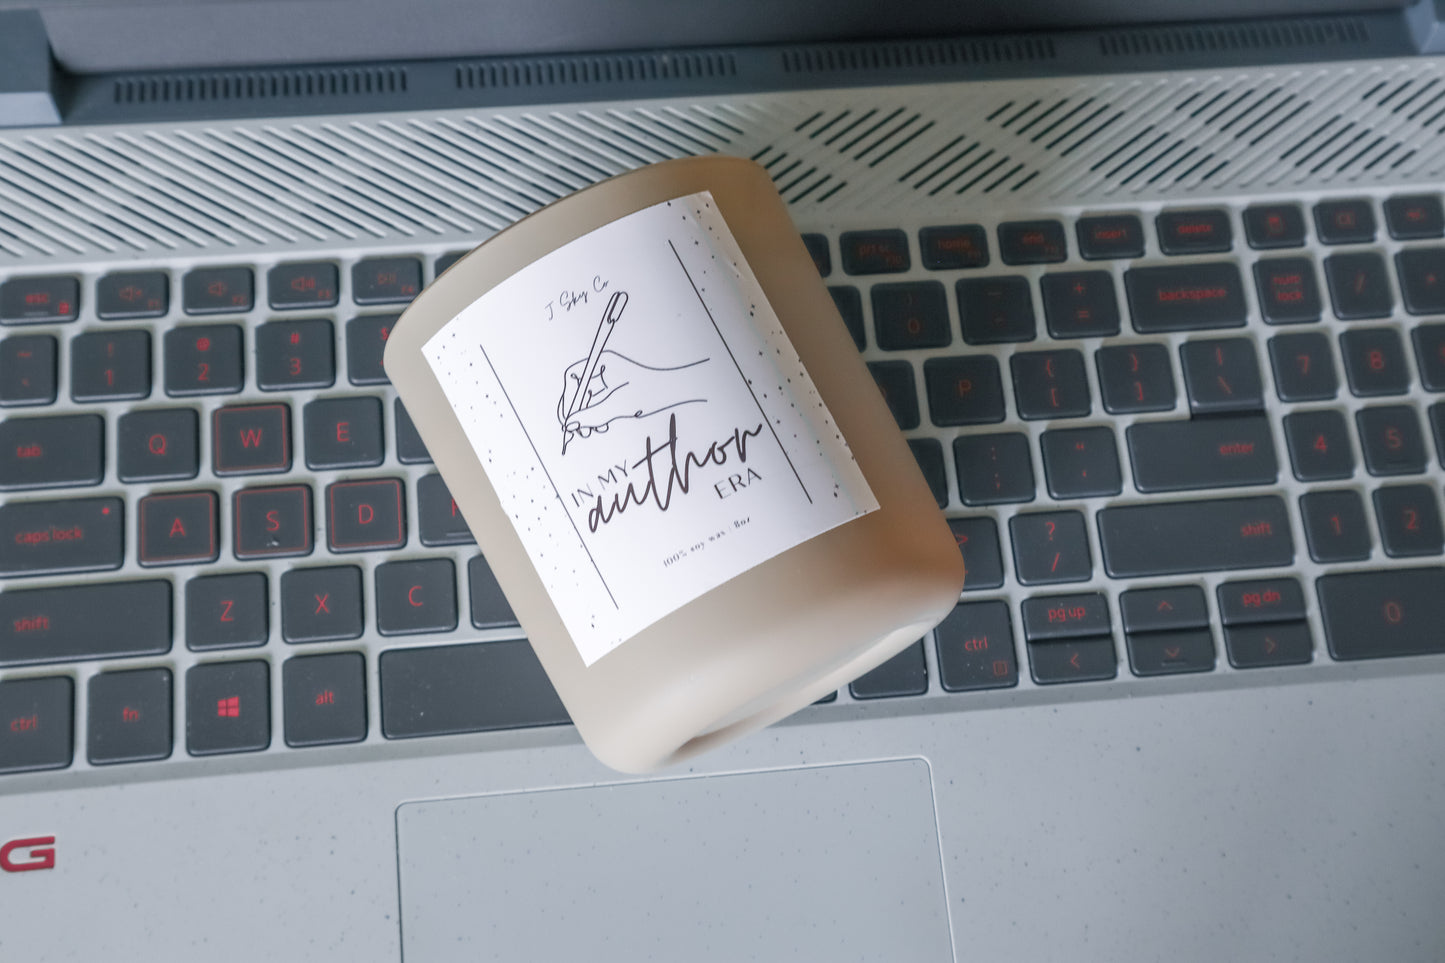 In my AUTHOR era candle